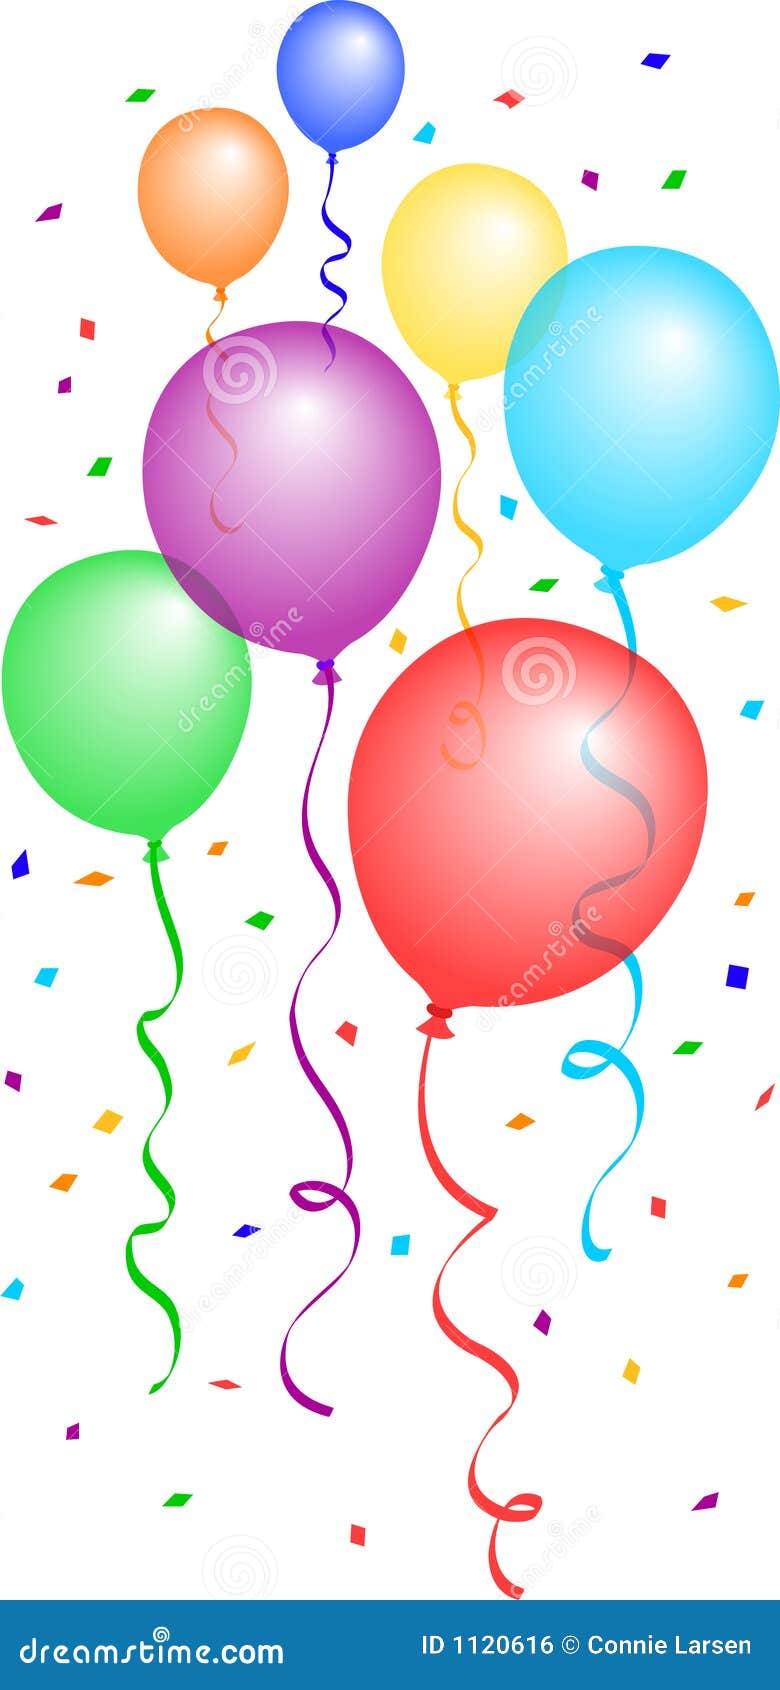 clipart balloons and confetti - photo #10